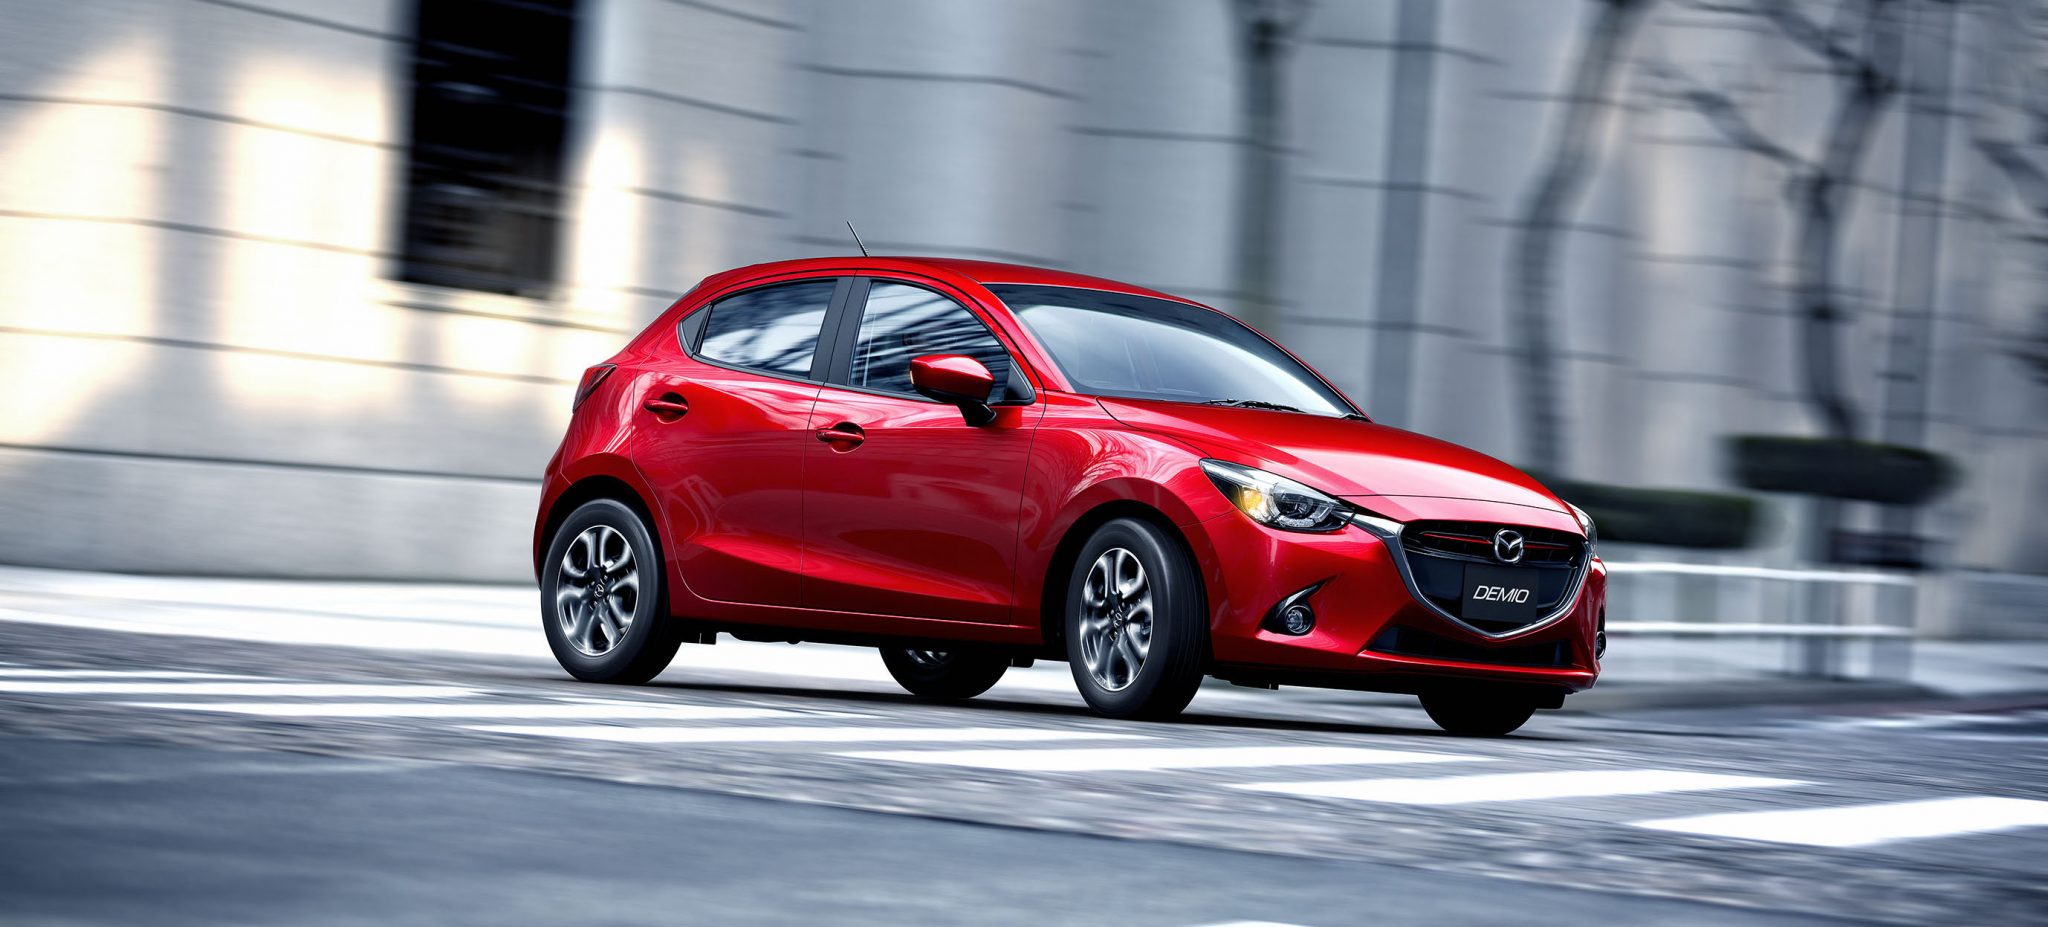 It's Possible to Legally Purchase a 2018 Mazda2 If You Live in the